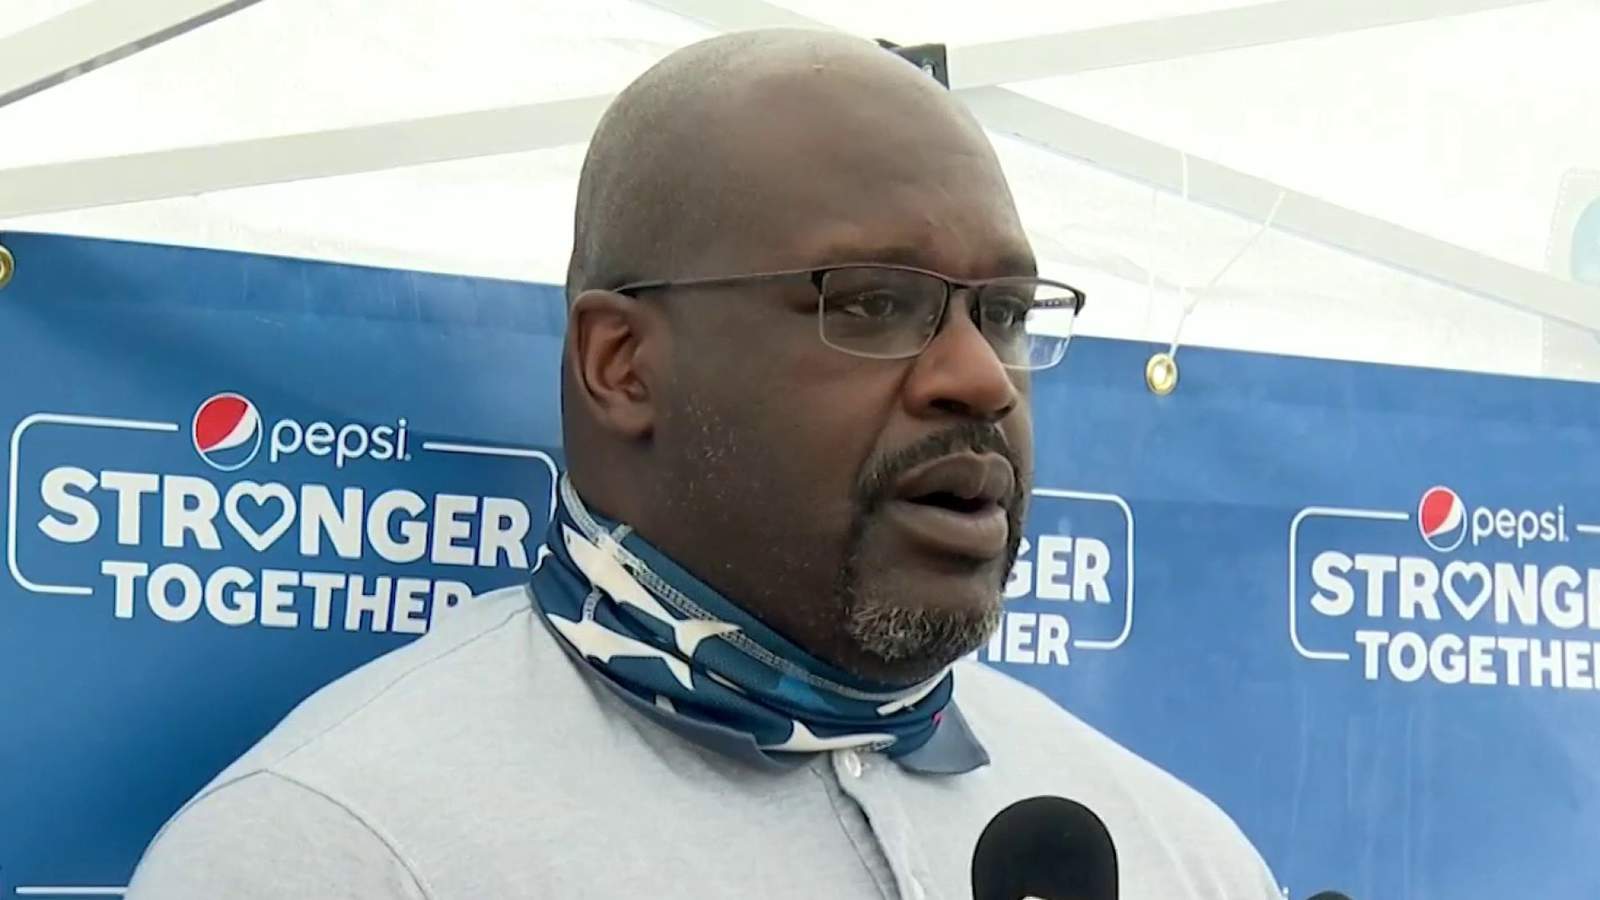 Nonprofit gets new hoops for victims of domestic abuse with help from Shaq, Orlando Magic